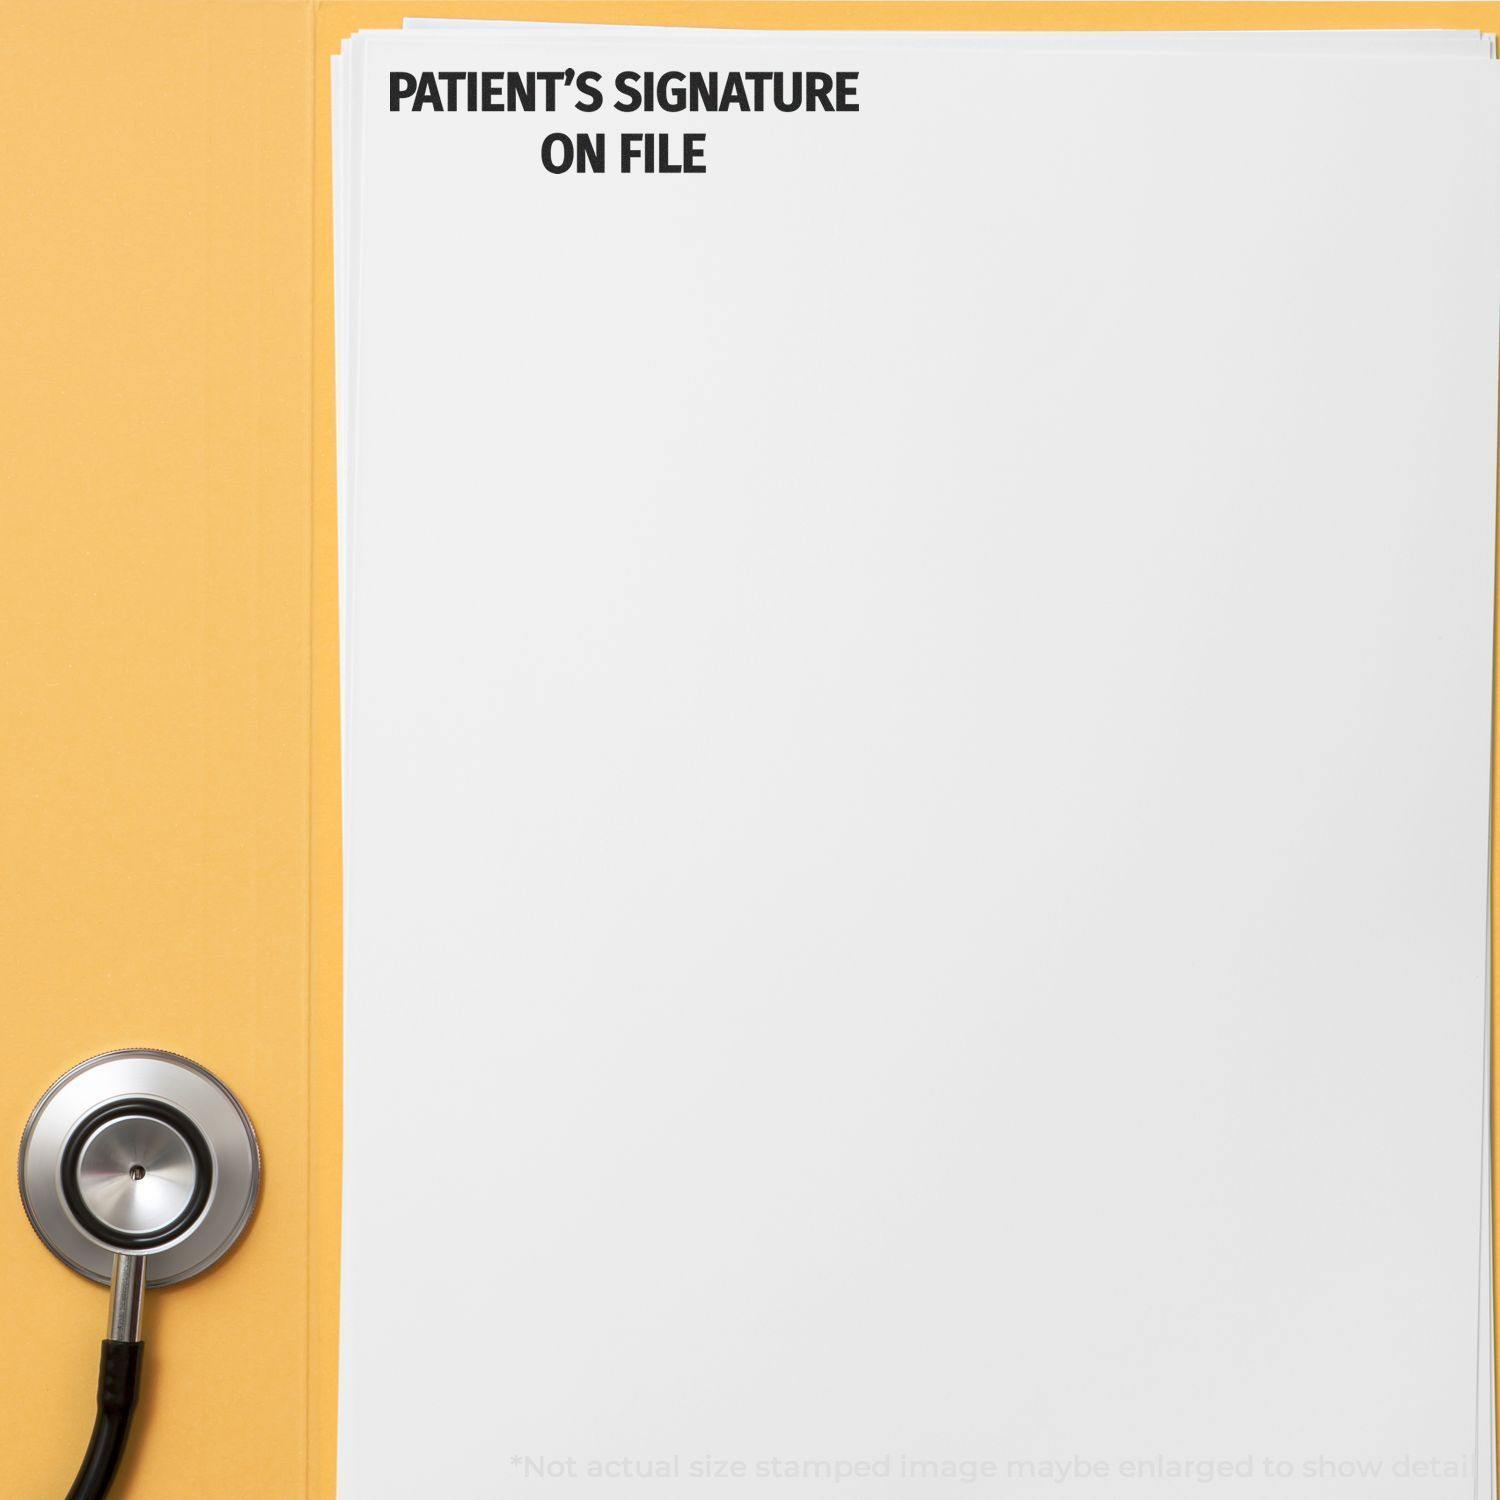 A stock office rubber stamp with a stamped image showing how the text "PATIENT'S SIGNATURE ON FILE" is displayed after stamping.